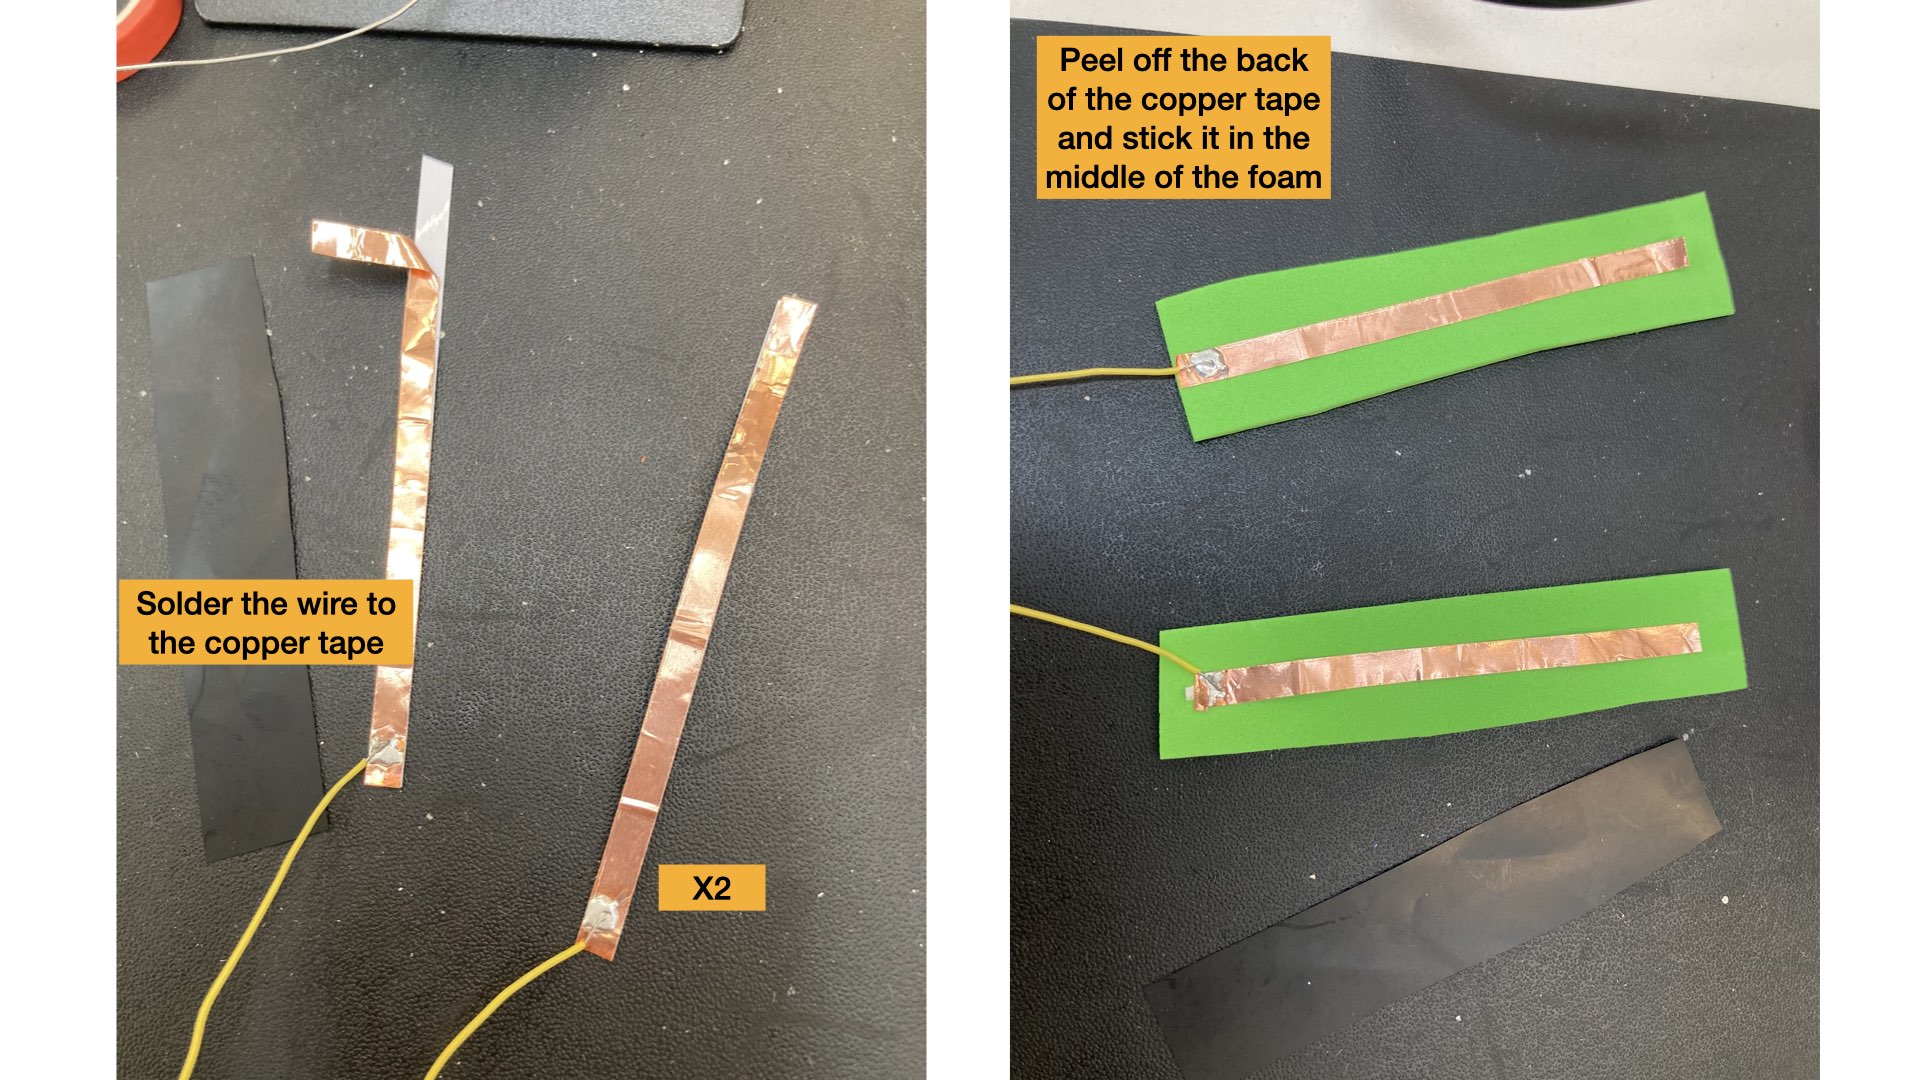 Image showing the copper tape is soldered to the wires at the bottom and then stuck on to the foam